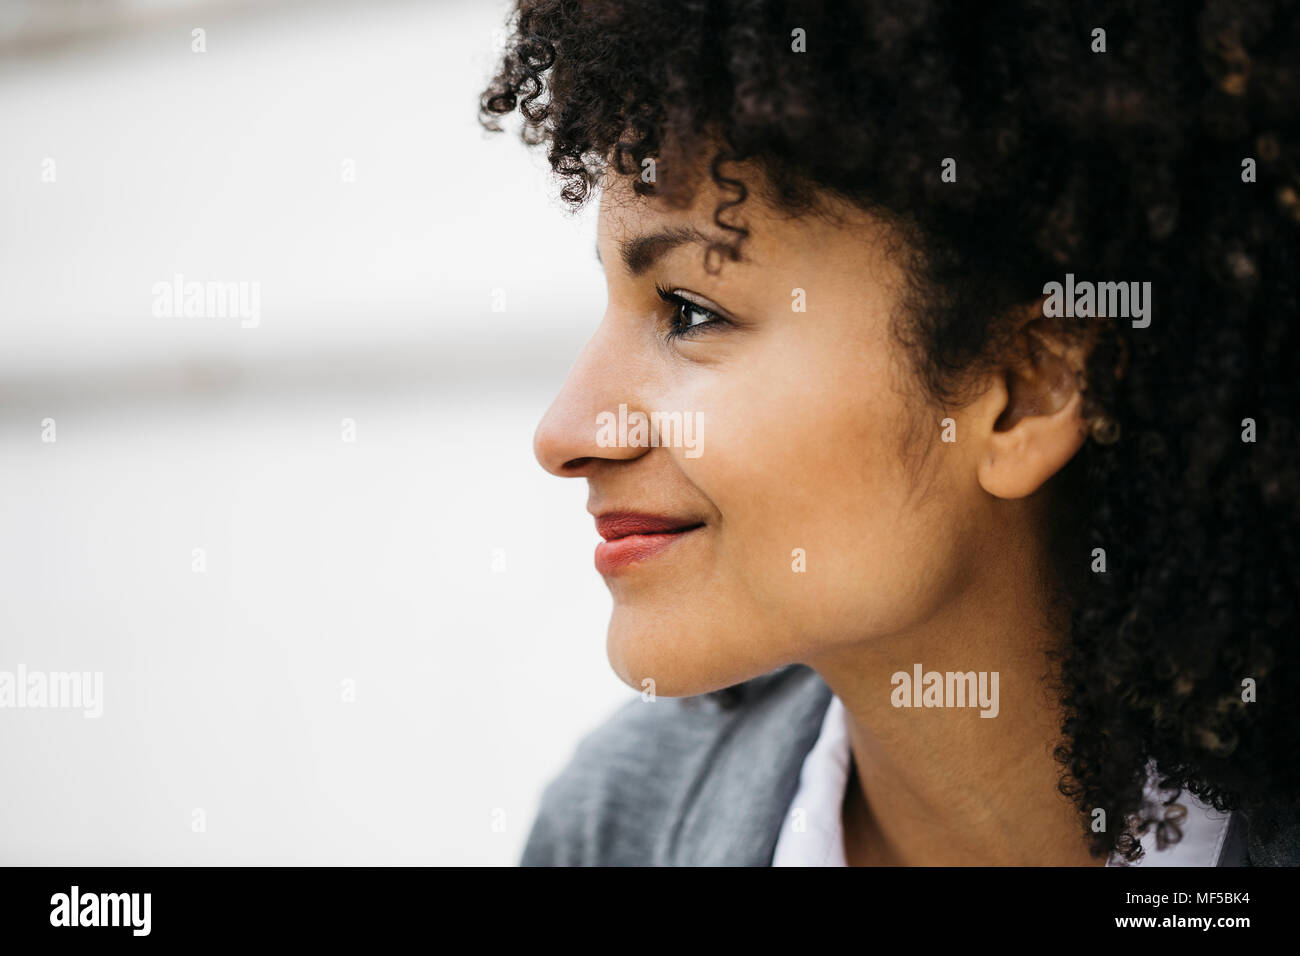 Profile of smiling woman with curly hair Stock Photo